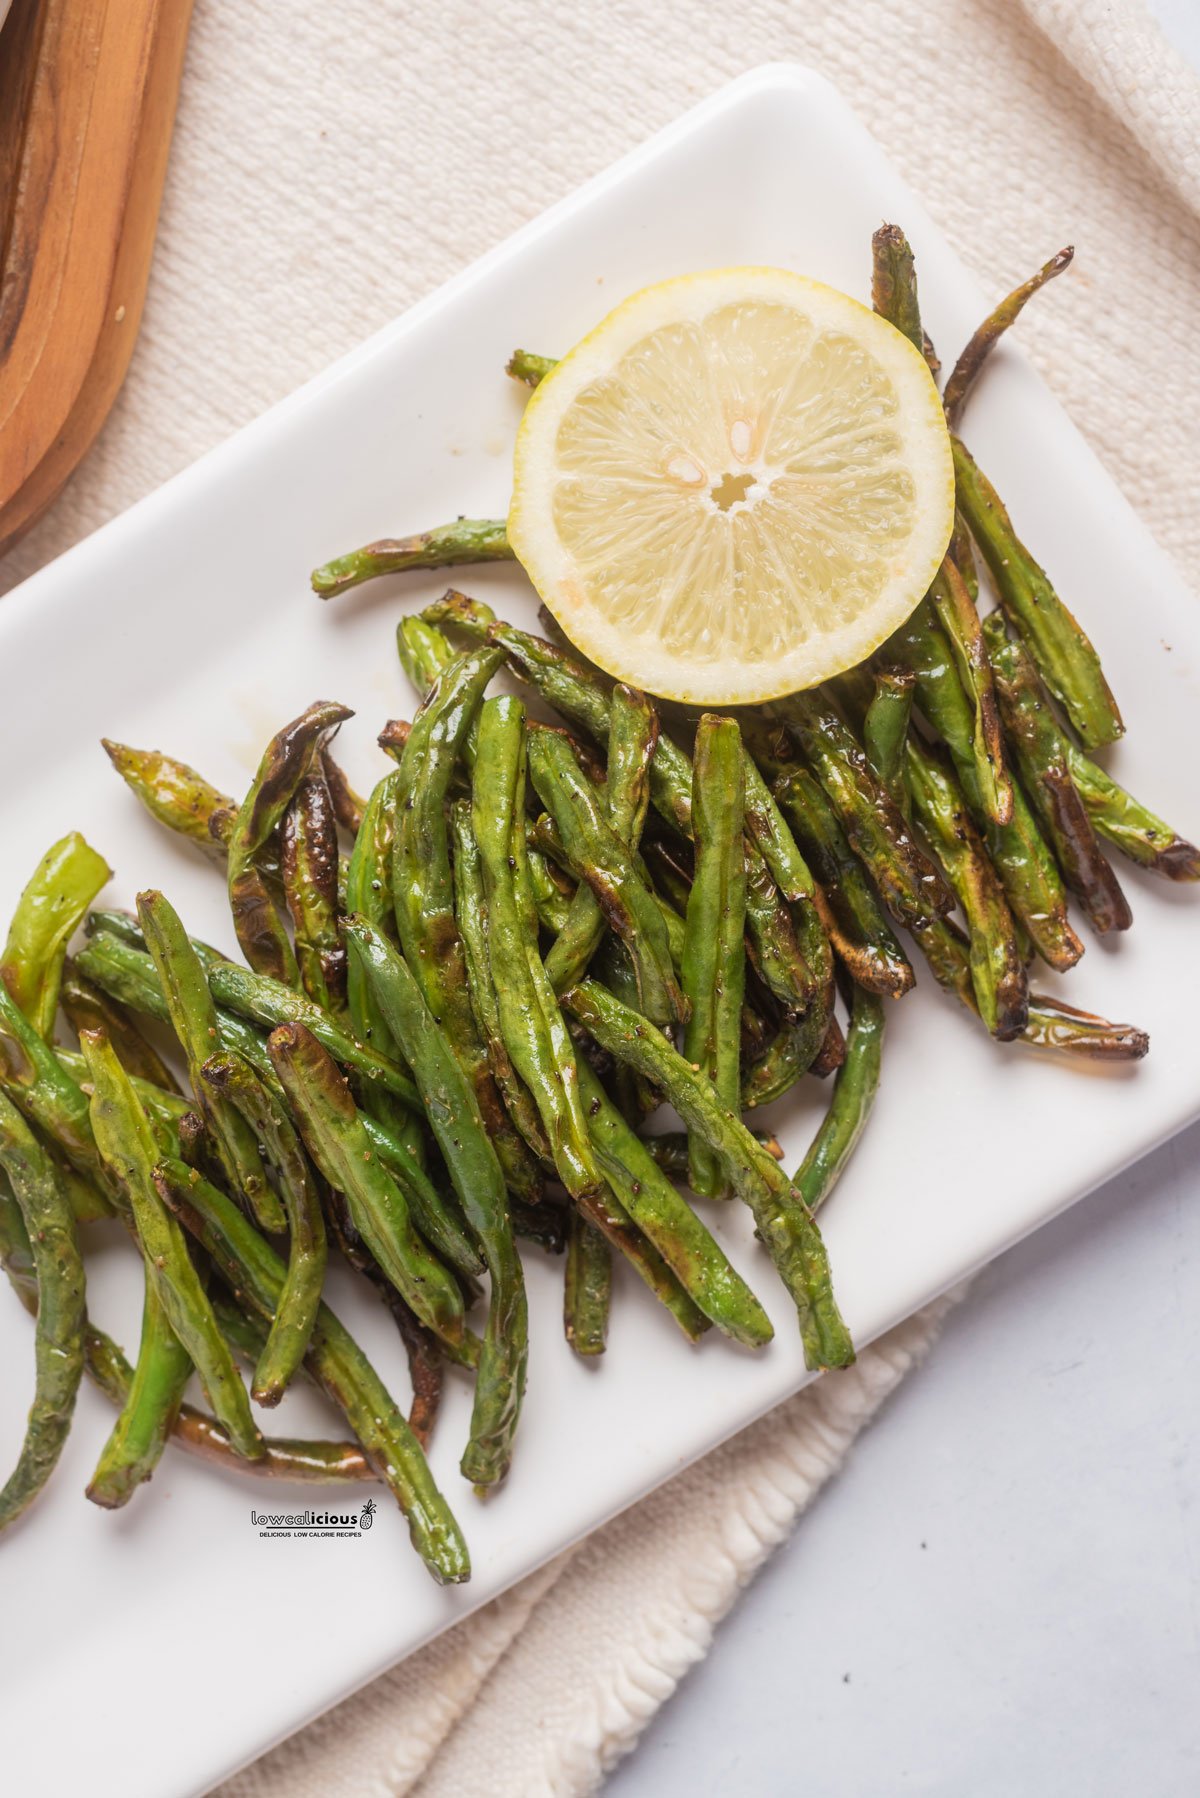 cooked air fryer green beans on a white rectangle platter with a wheel of lemon on top